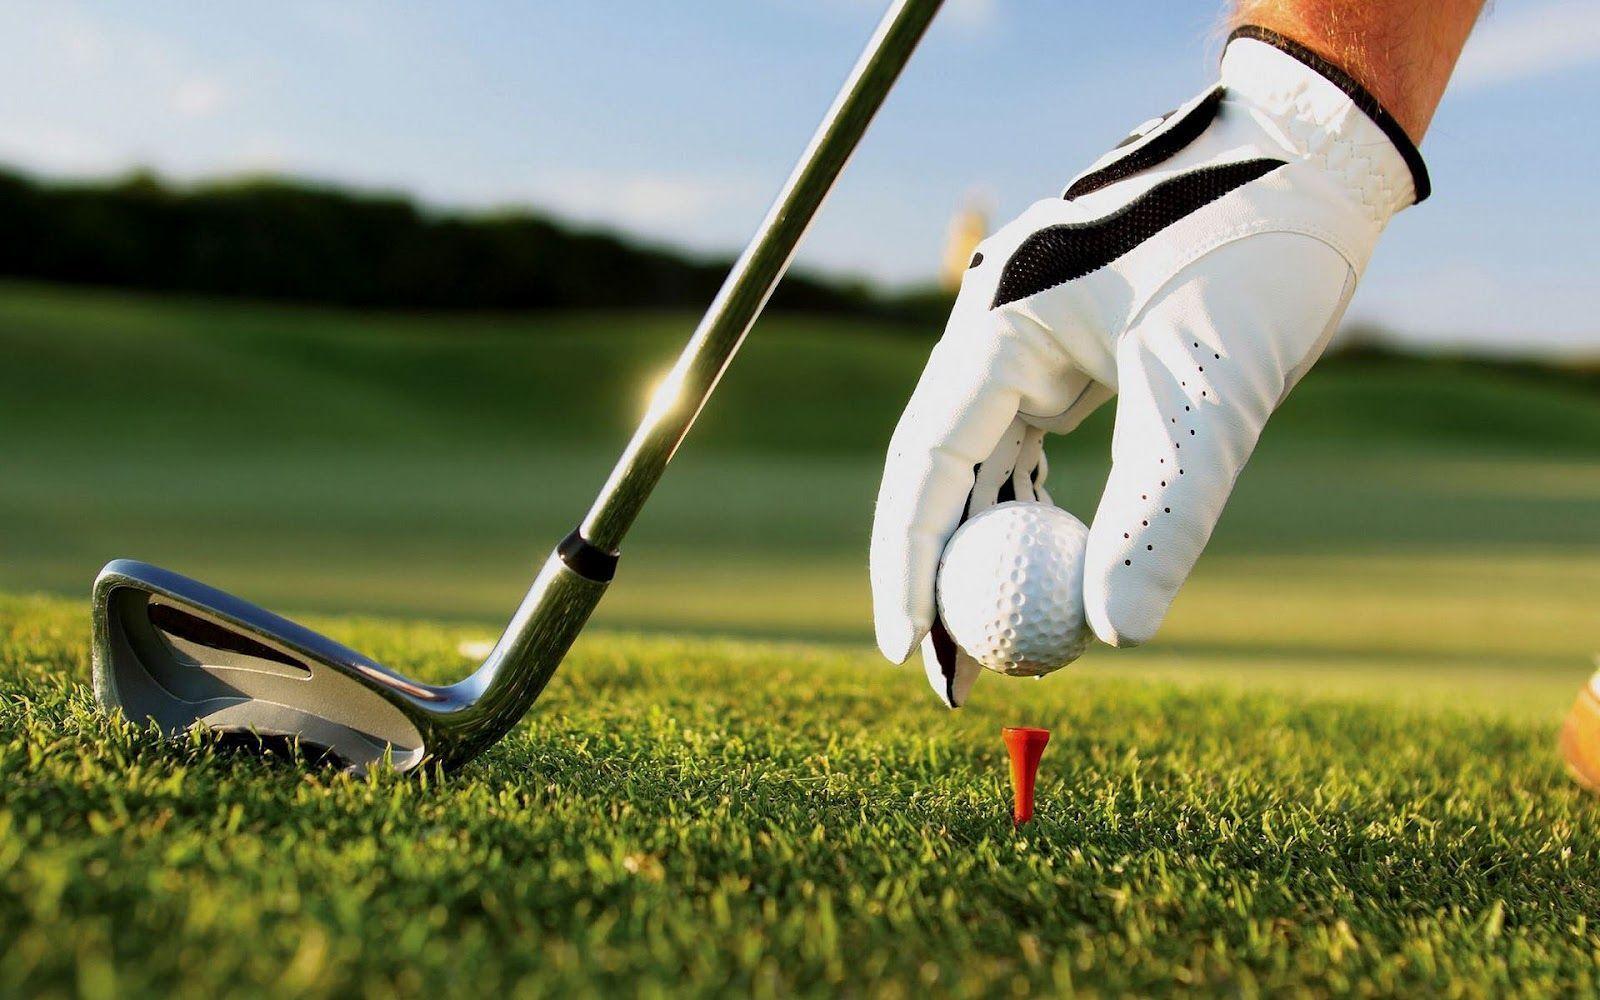 Wallpapers For > Nike Golf Wallpapers Hd